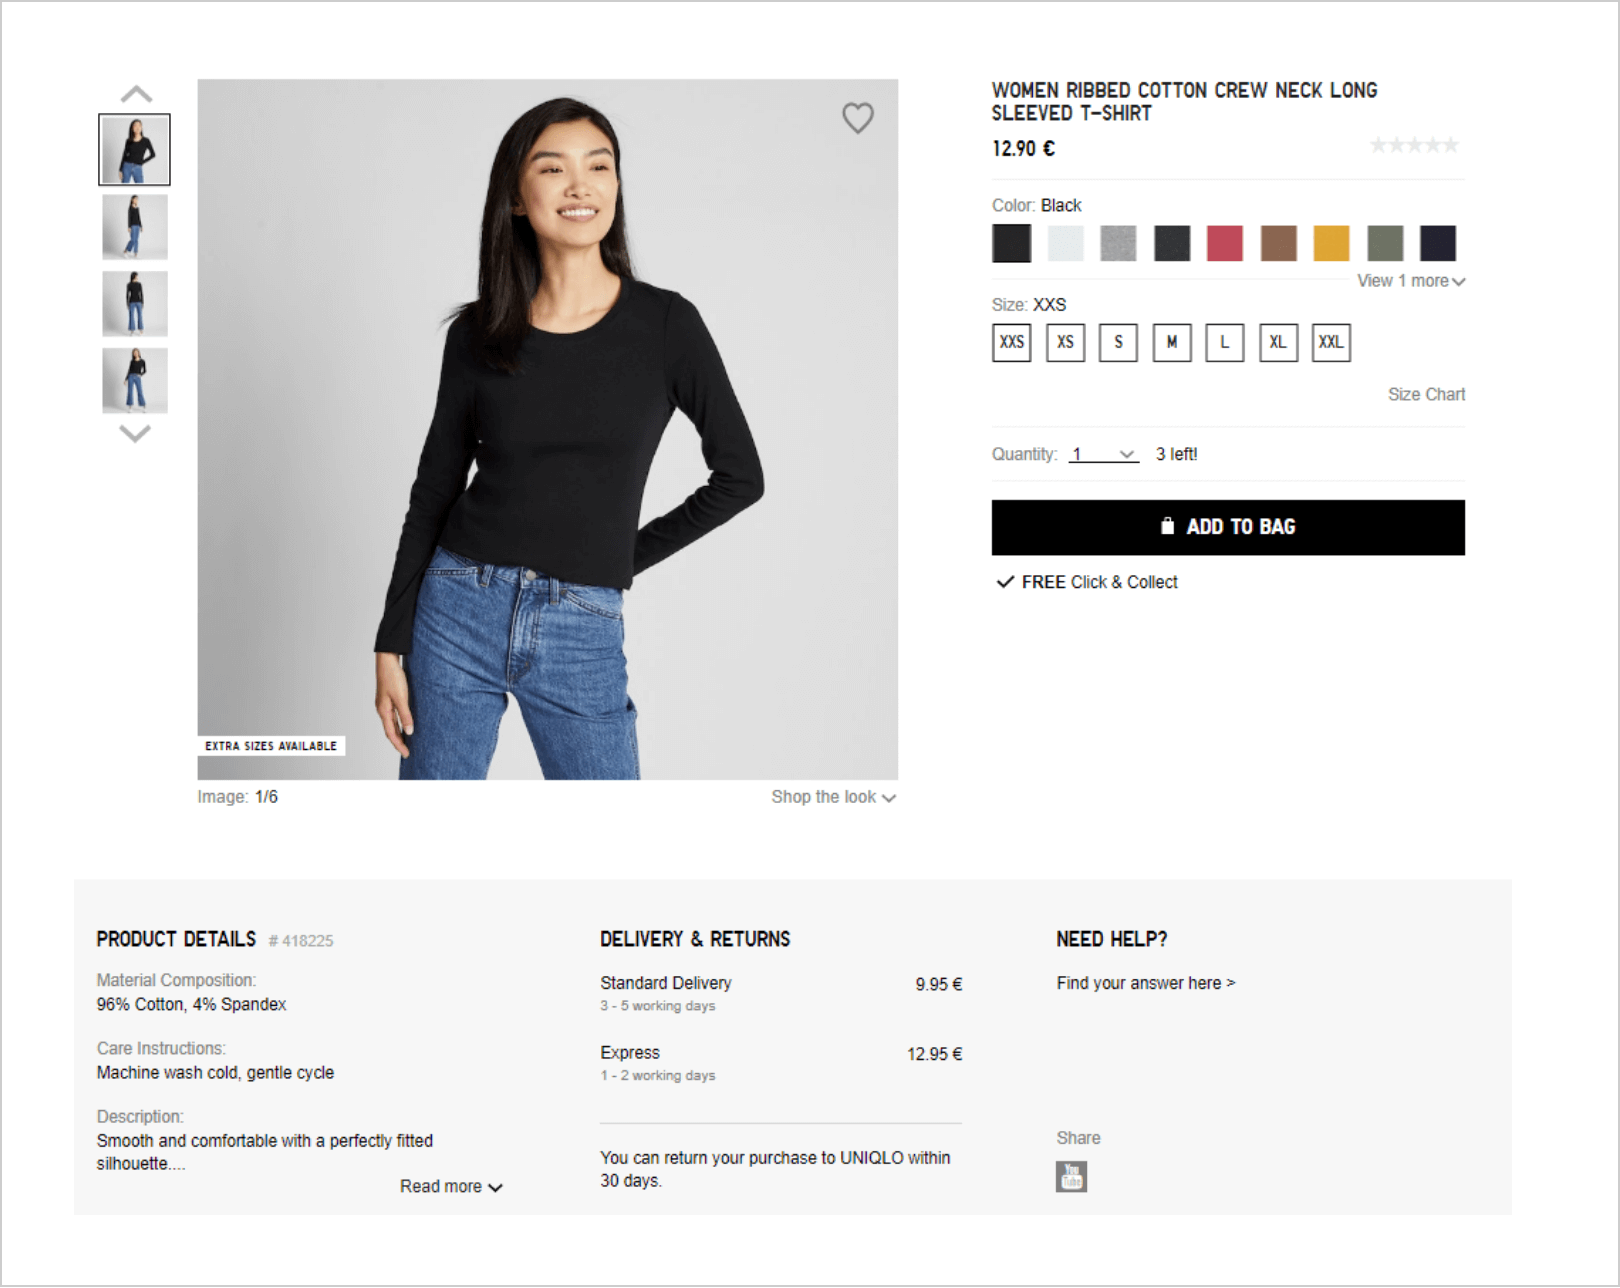 Uniqlo product and delivery and returns details